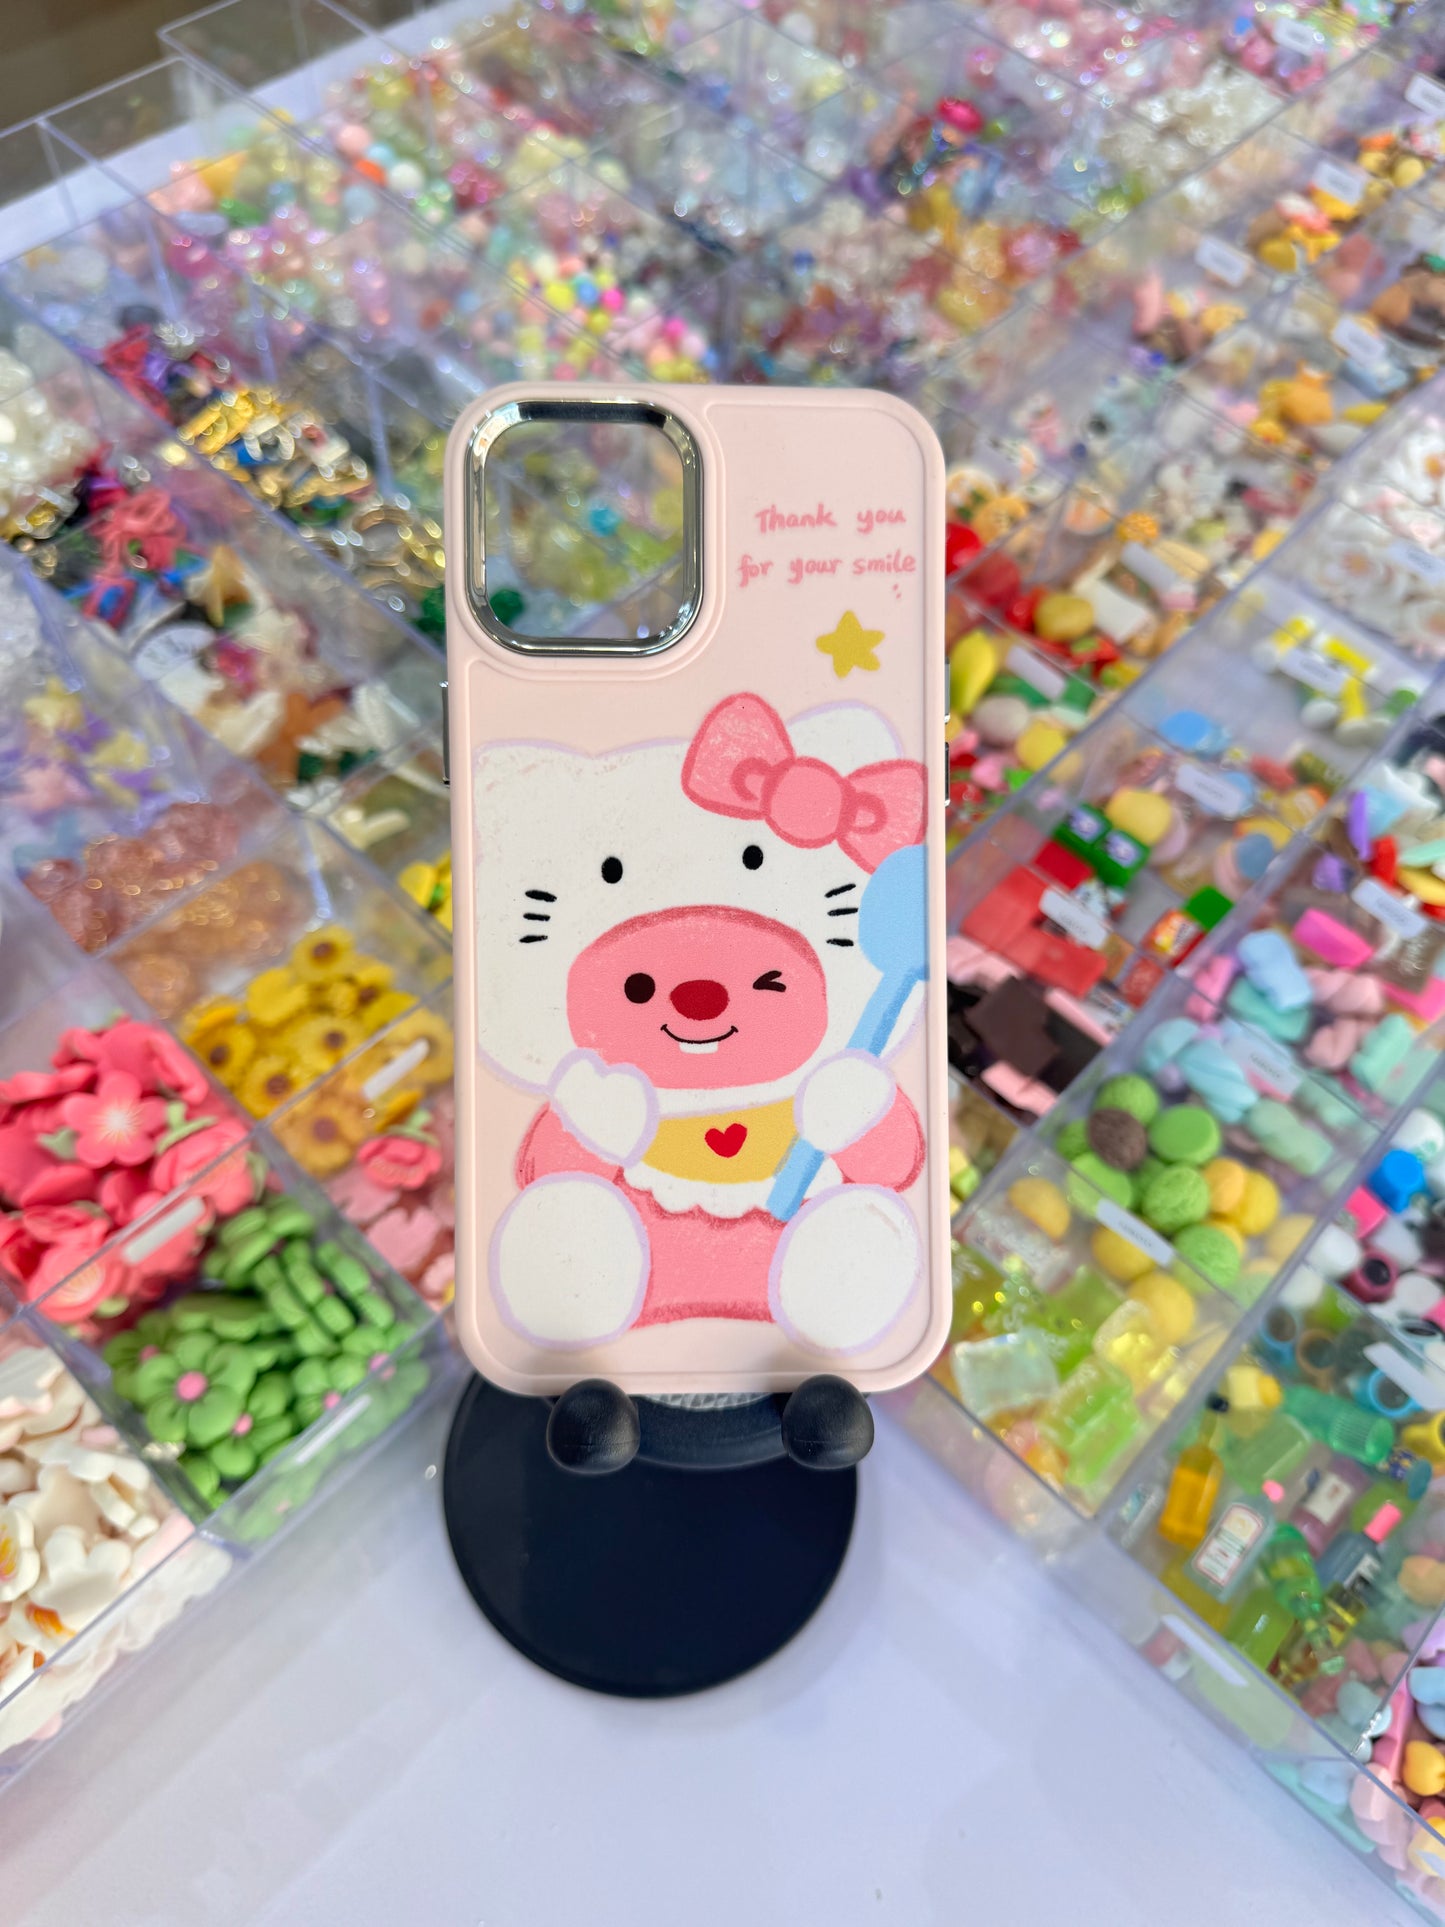 Smiley hello kitty Case For IPhones